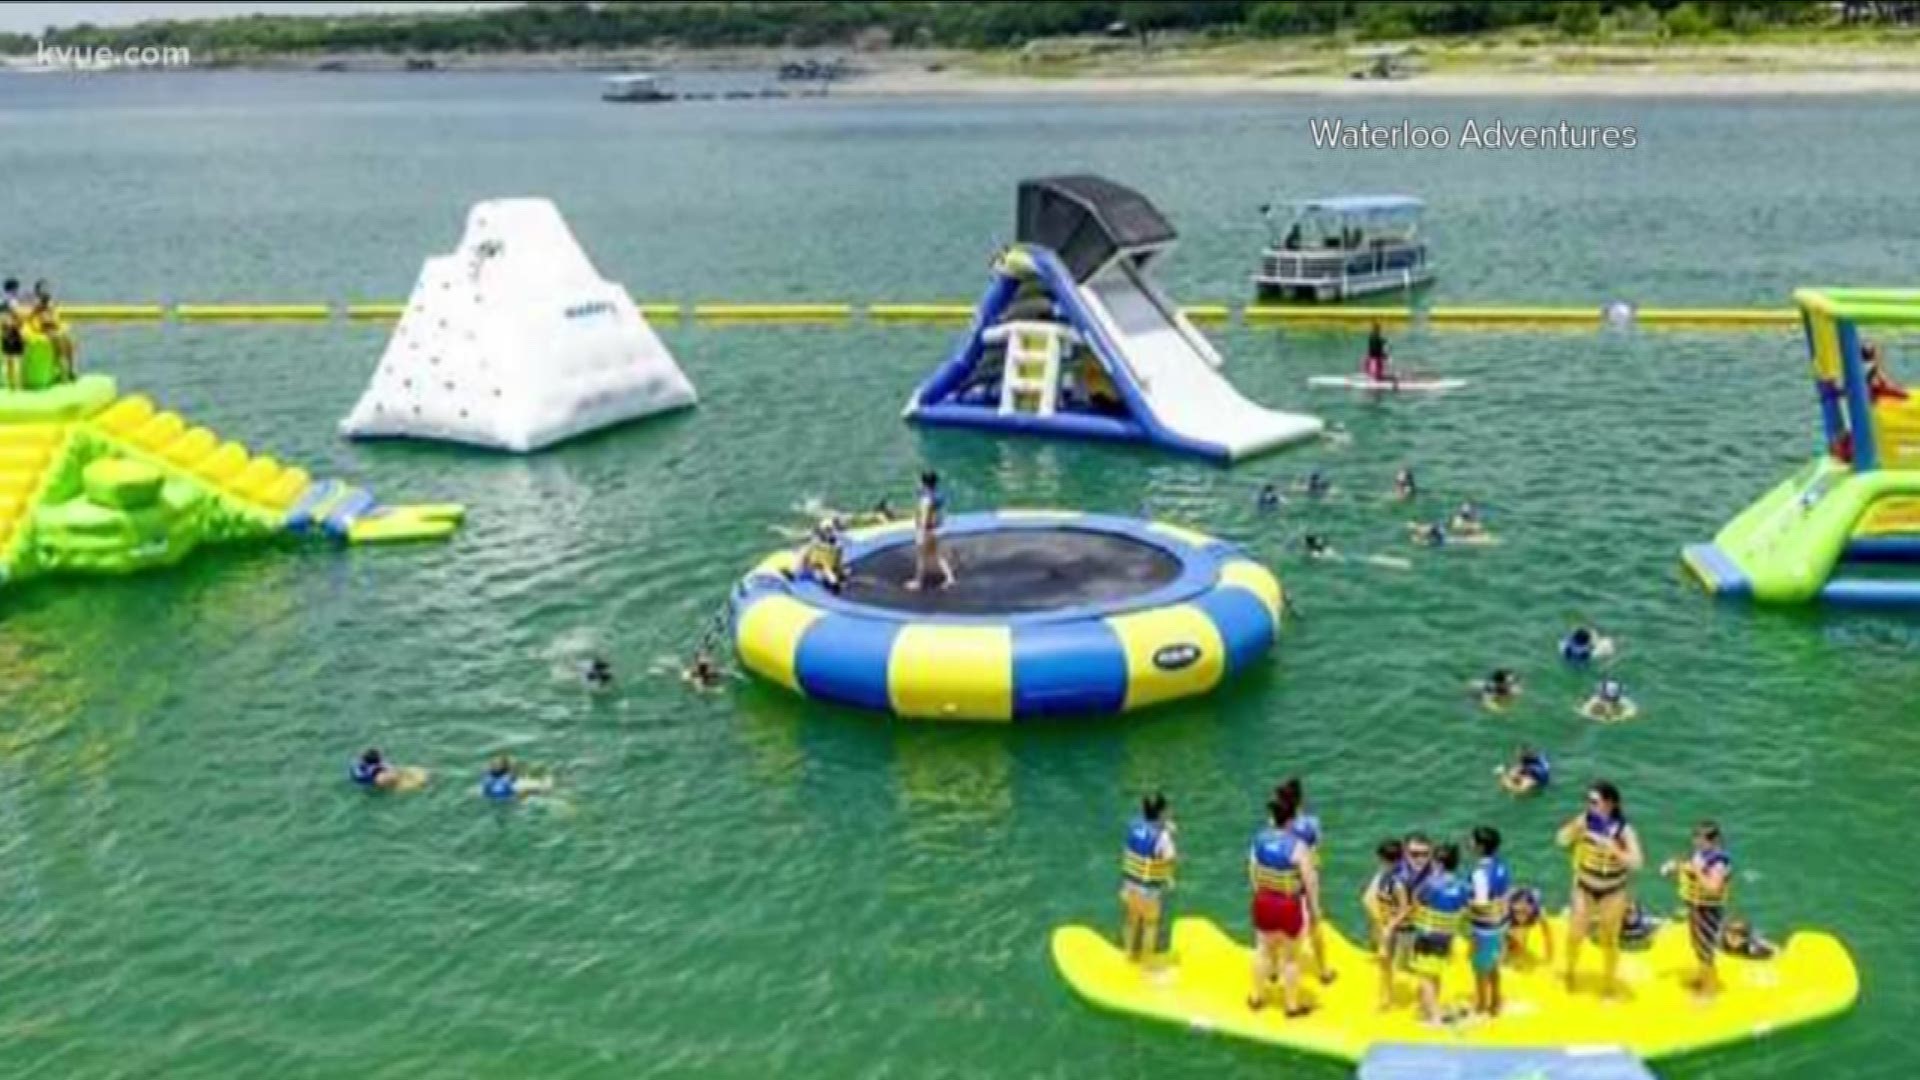 Waterloo Adventures features an inflatable water park on Lake Travis. It has about 600 feet of floating courses with trampolines, hurdles and slides.